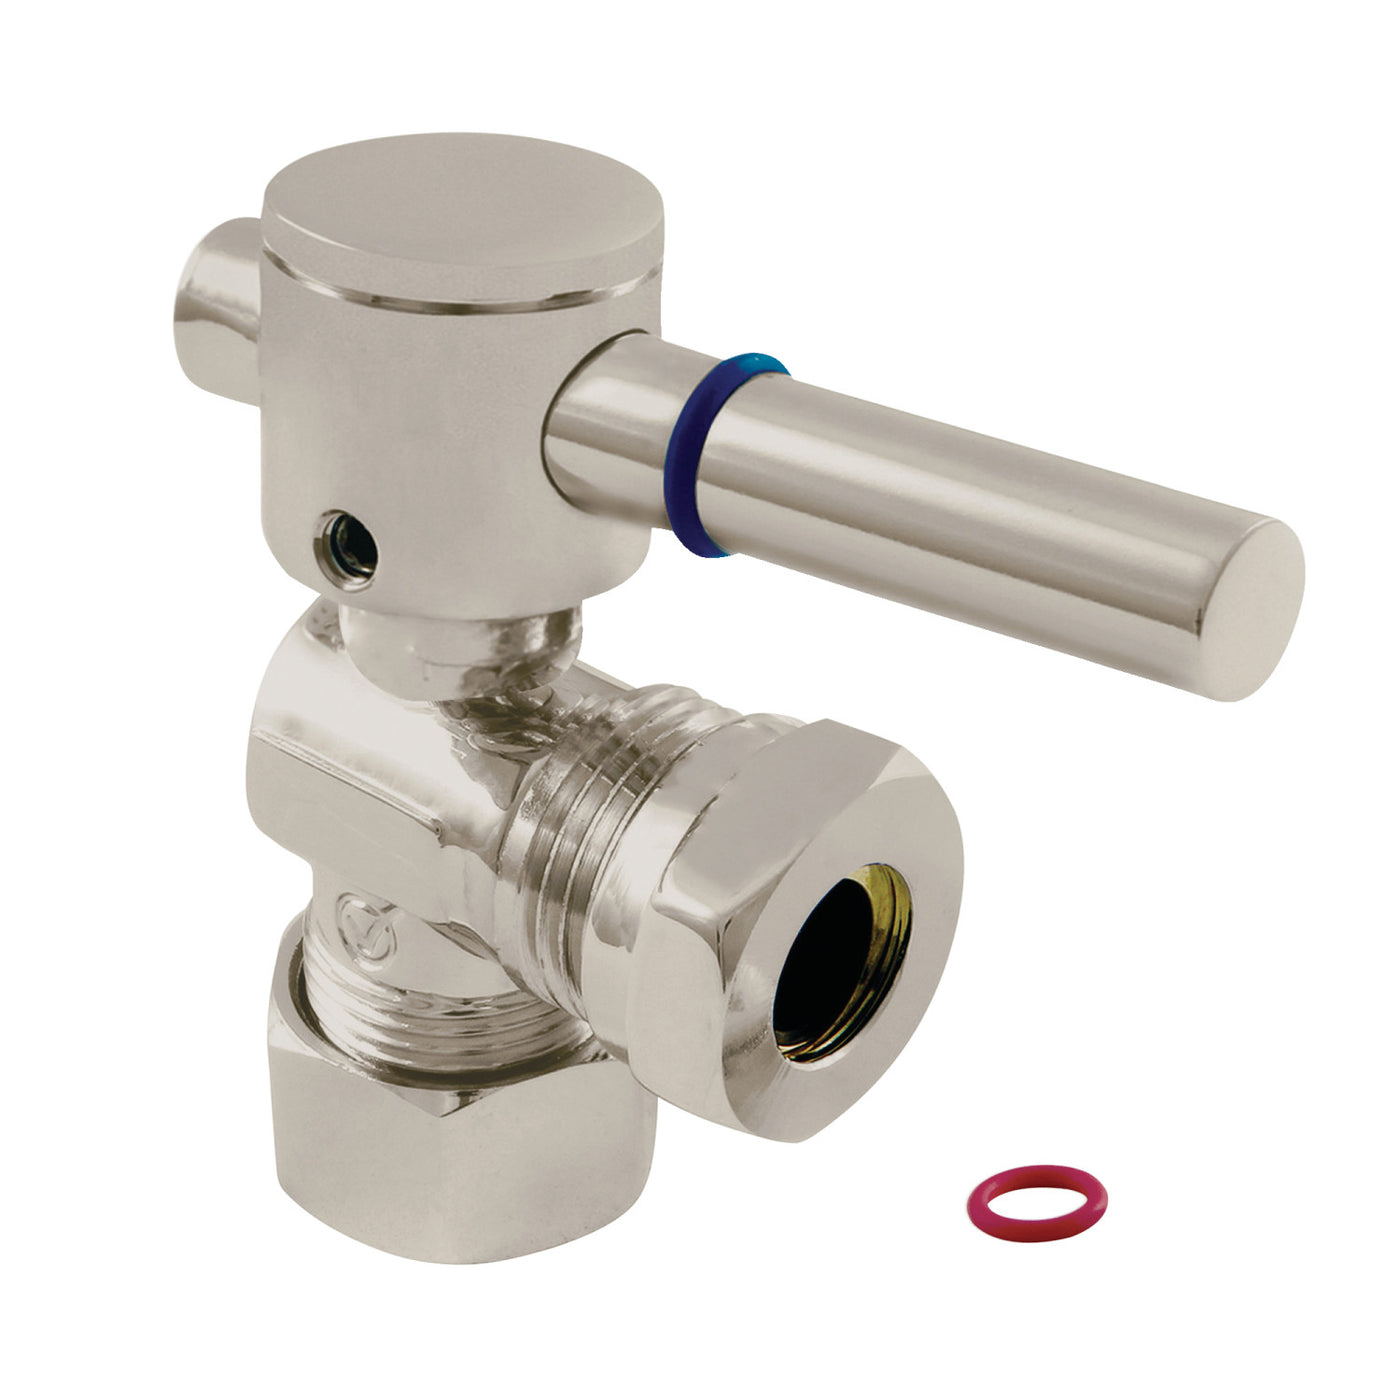 Elements of Design ECC54308DL 5/8-Inch OD Comp x 1/2-Inch or 7/16-Inch Slip Joint Angle Stop Valve, Brushed Nickel